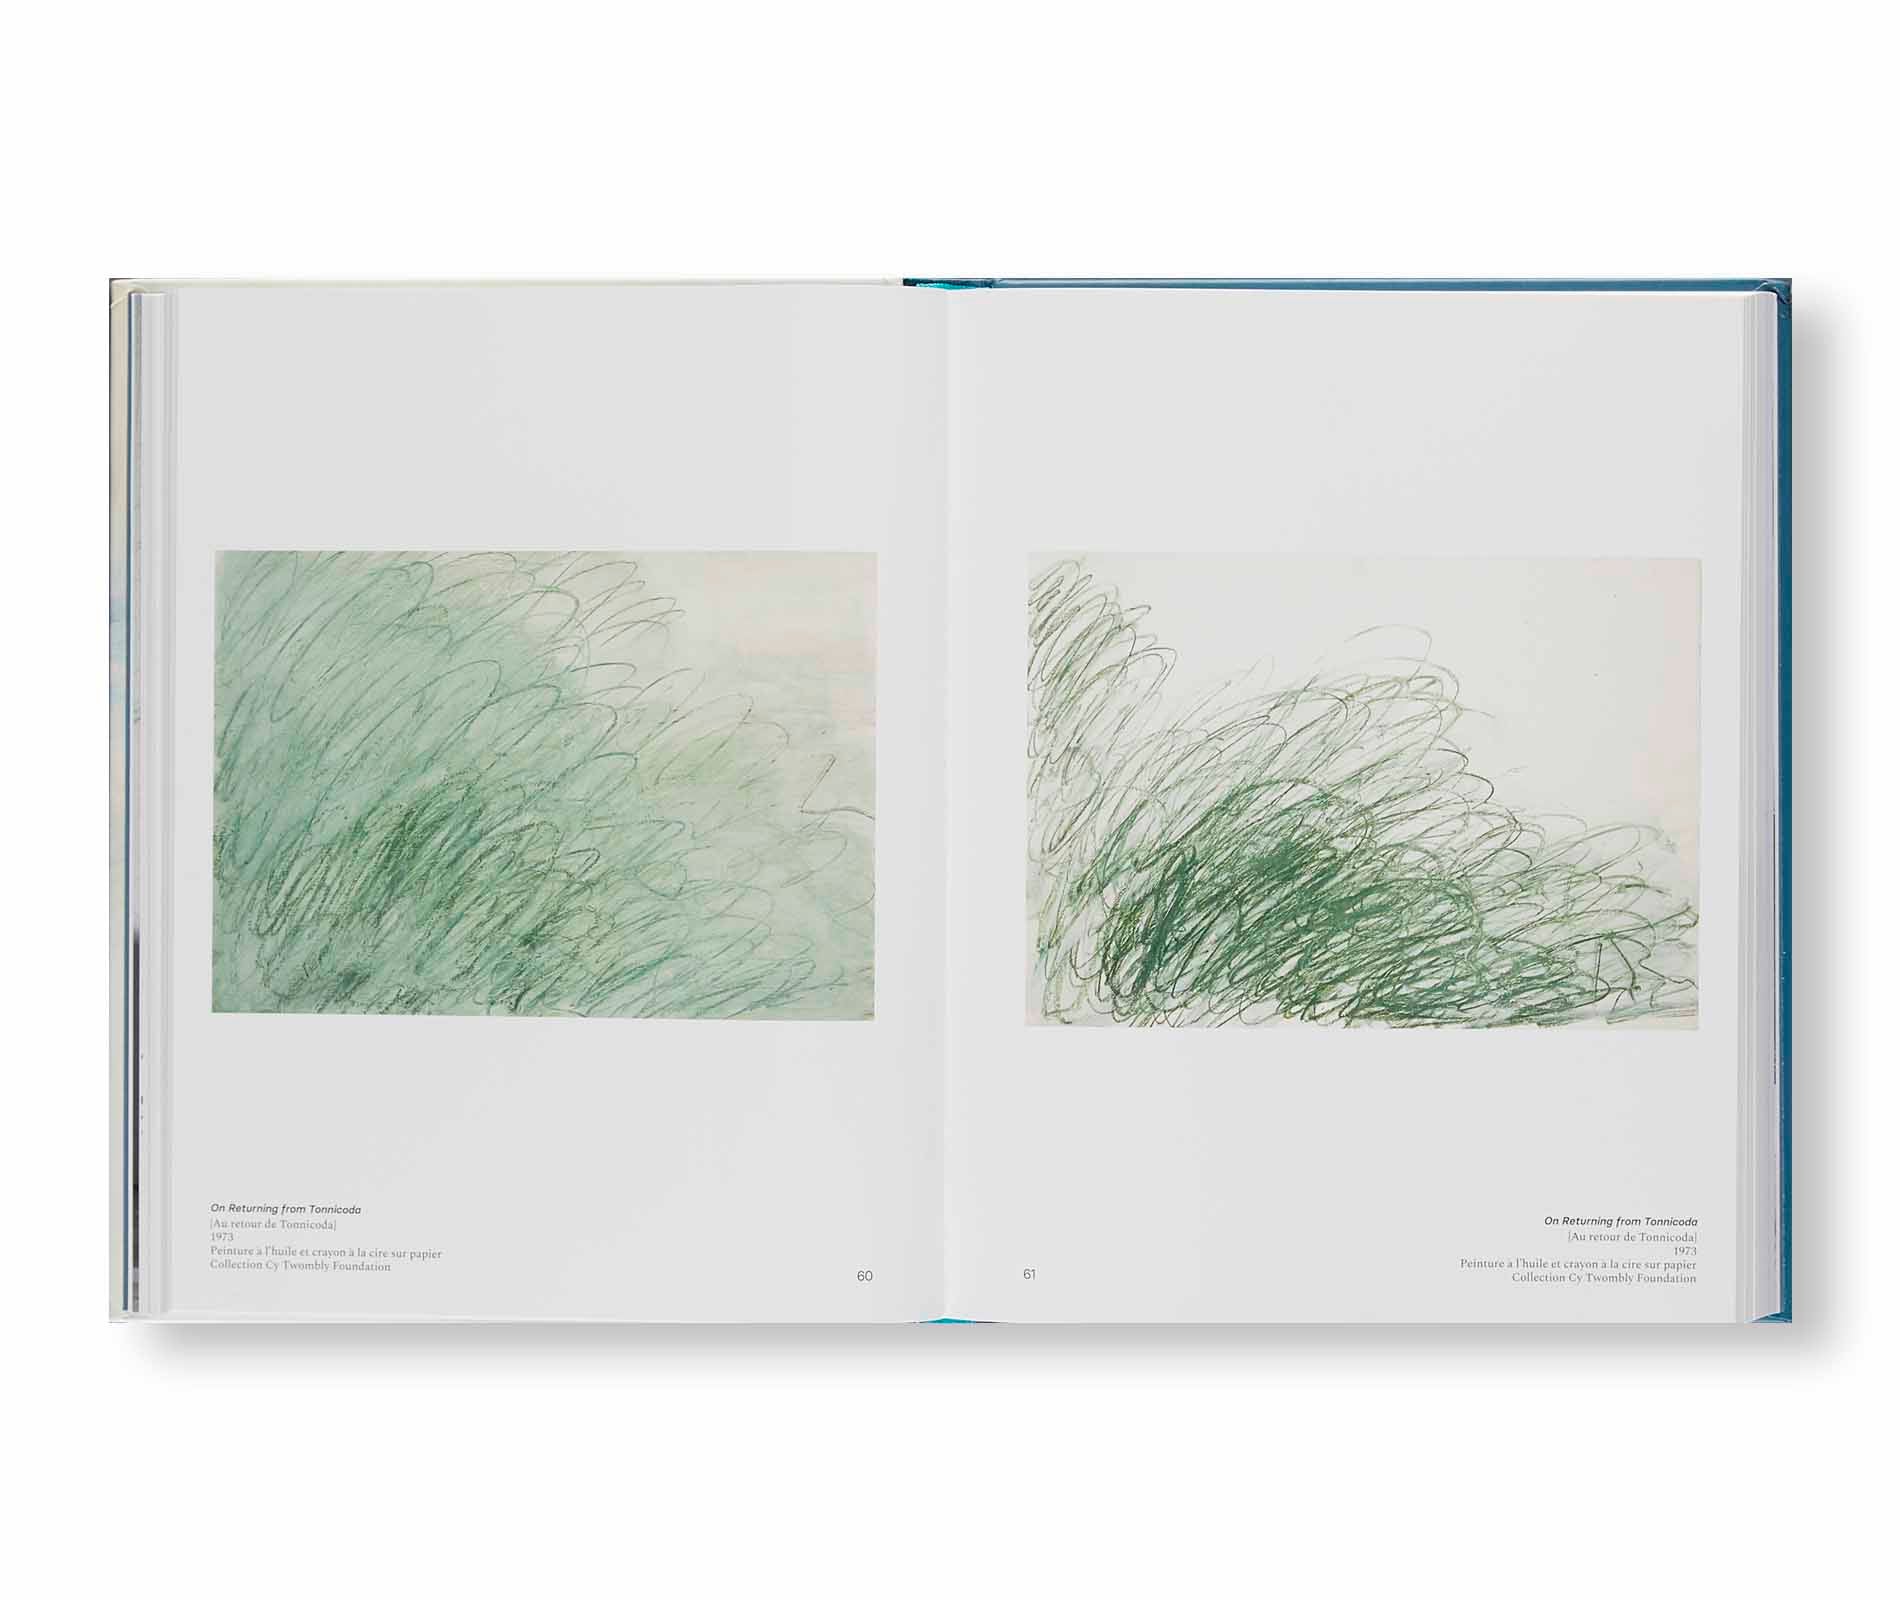 CY TWOMBLY. ŒUVRES GRAPHIQUES (1973-1977) by Cy Twombly